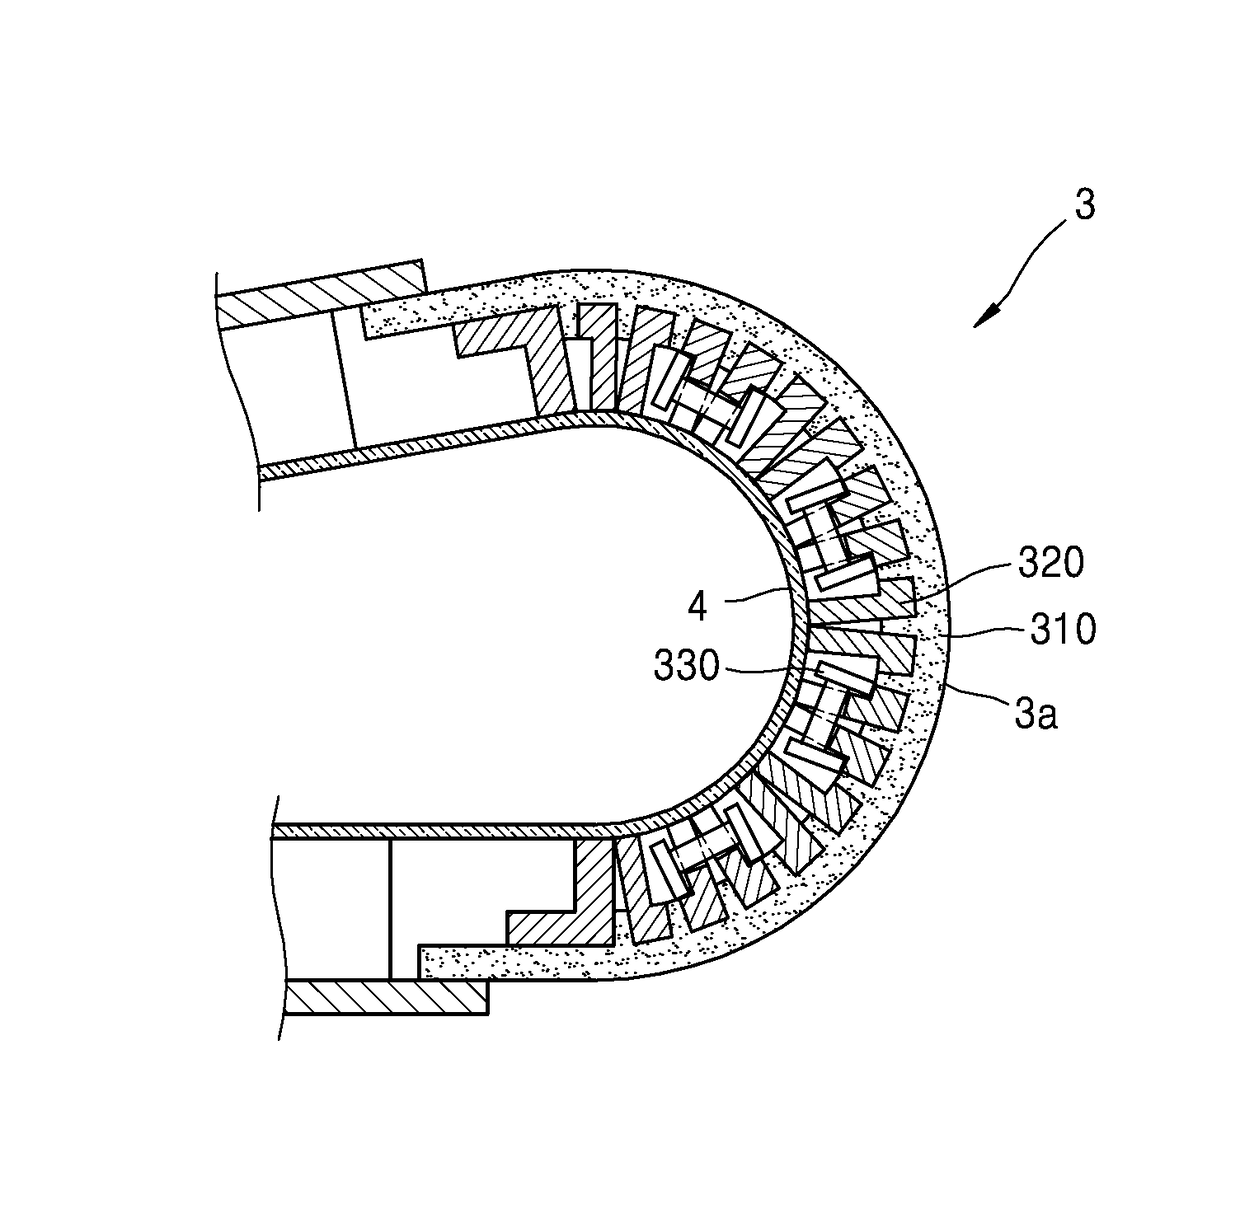 Foldable electronic device including flexible display element